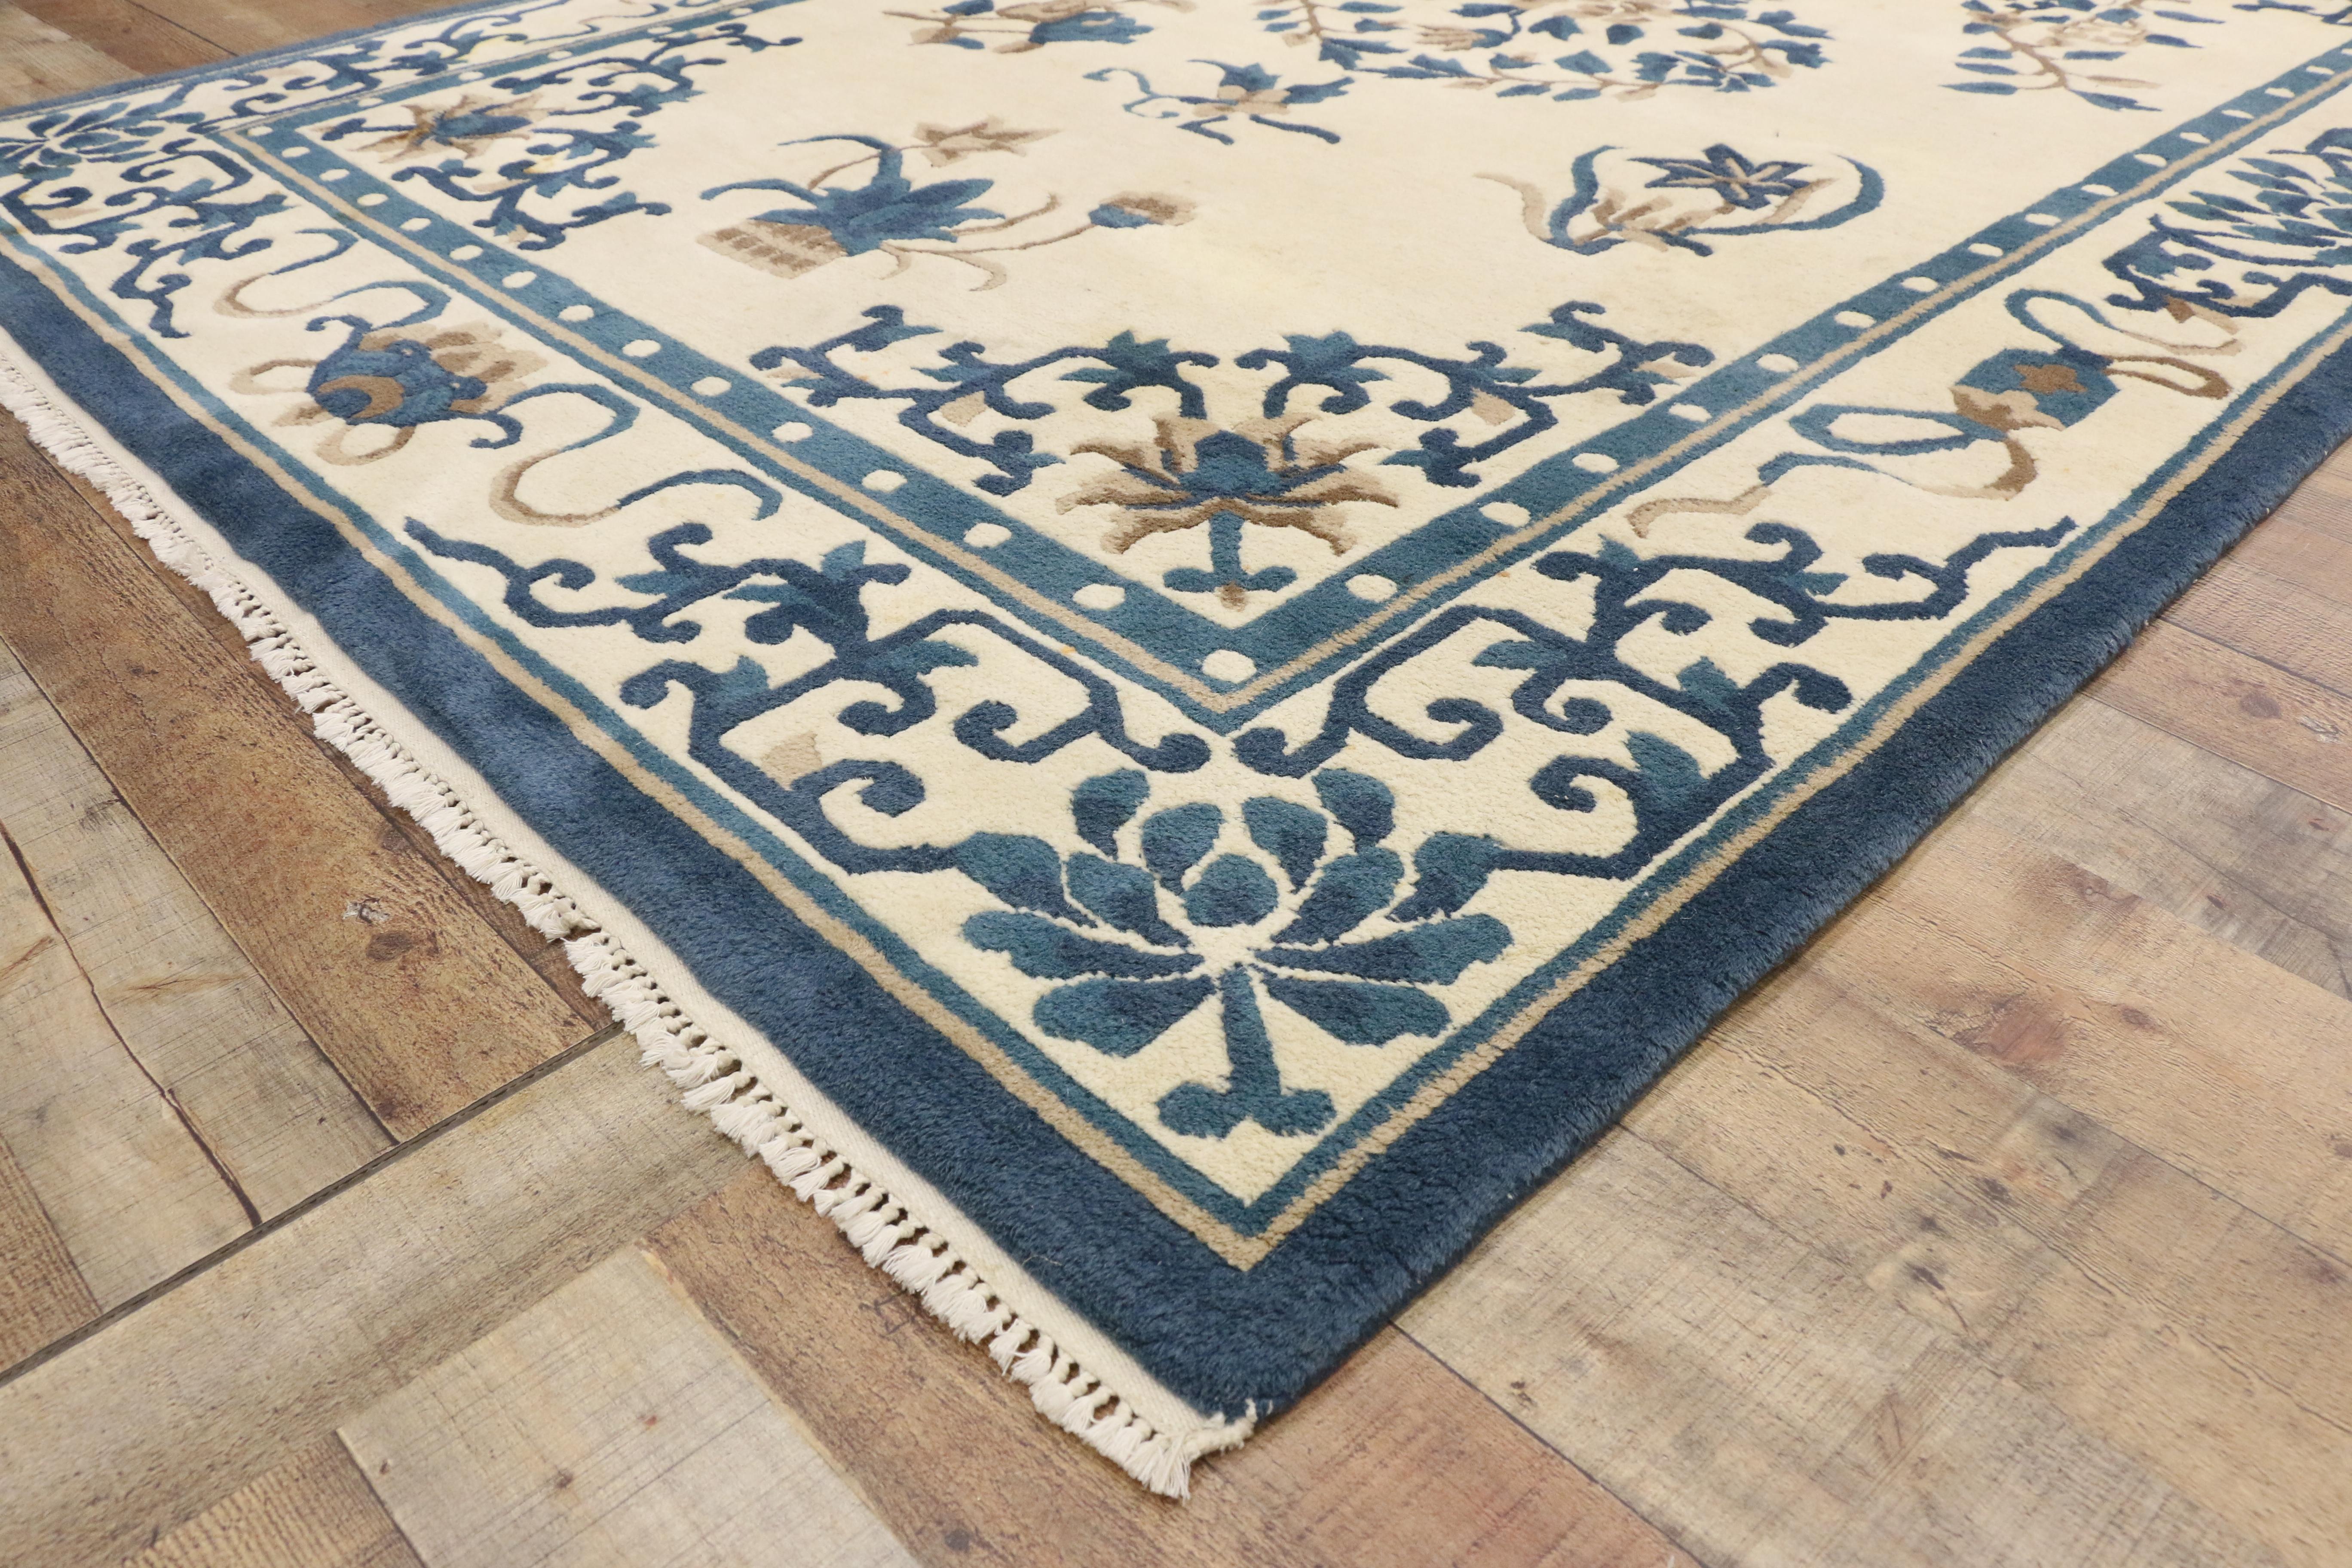 77211, Vintage Chinese Peking Chinoiserie Style Rug. This hand knotted wool vintage Chinese style rug features a rounded open centre medallion comprised of interlaced peony blossoms and vinery. Floral motifs including plum blossoms, chrysanthemums,